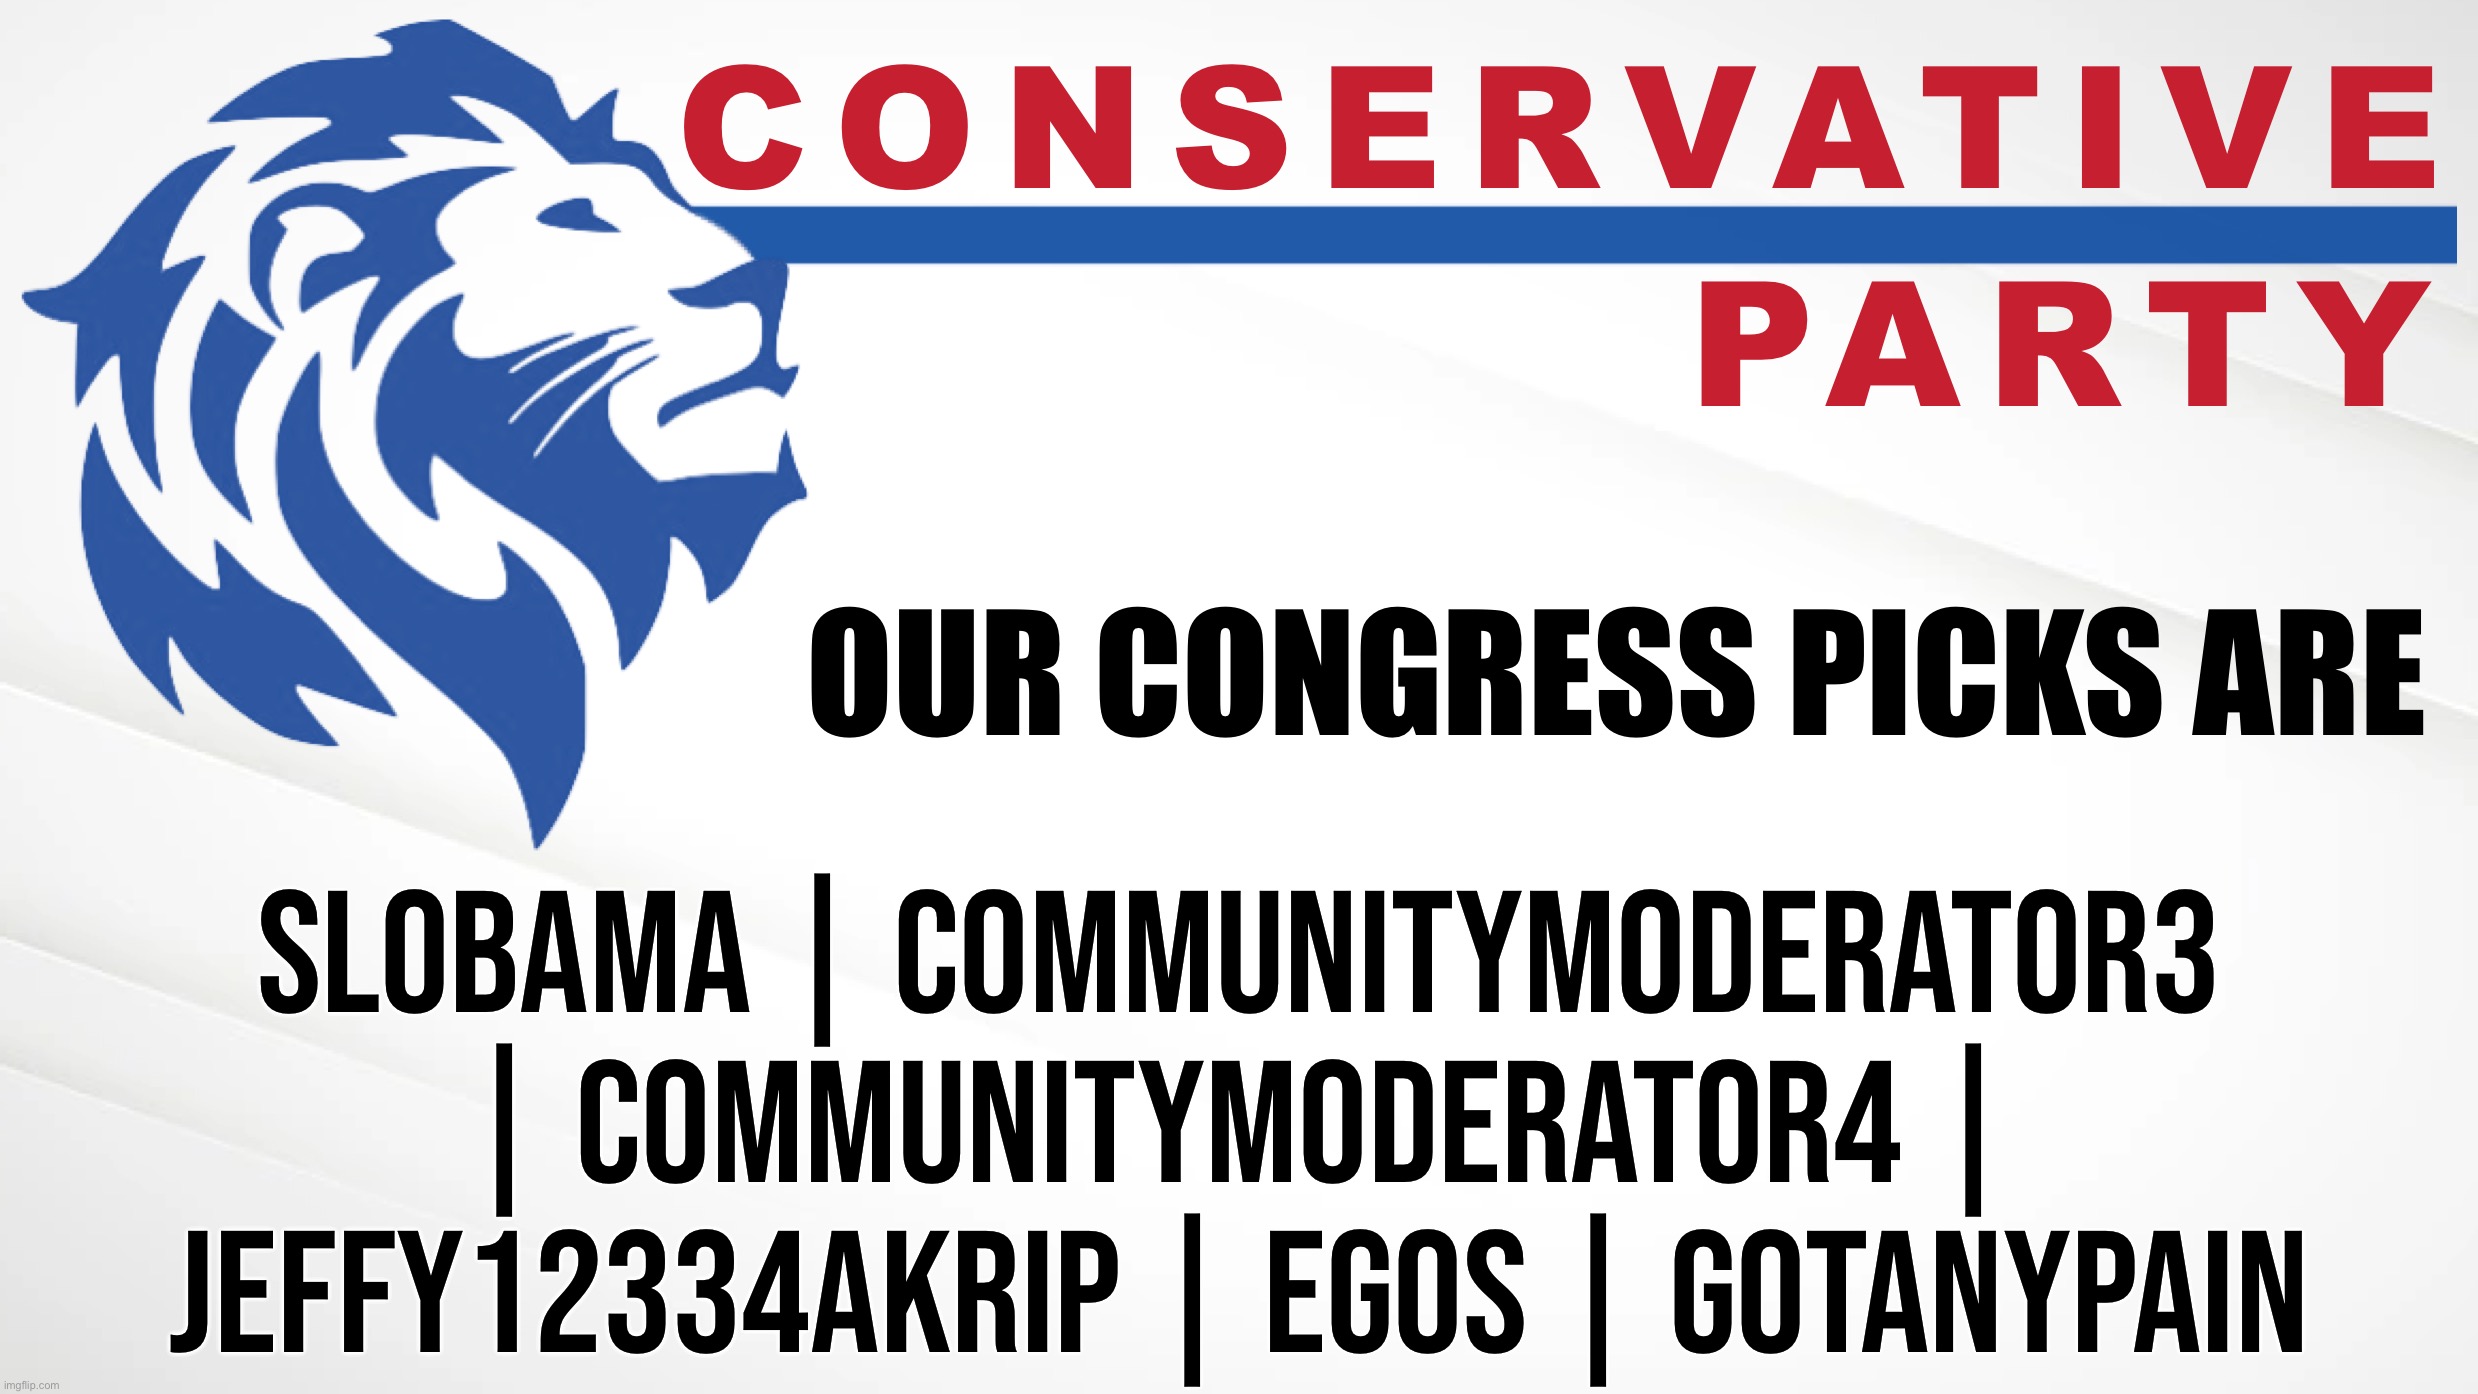 Six ROCK-RIBBED PATRIOTS ready to SHOCK and UPEND the conventional political wisdom. #msmlies #conservativeparty | OUR CONGRESS PICKS ARE; SLOBAMA | COMMUNITYMODERATOR3 | COMMUNITYMODERATOR4 | JEFFY12334AKRIP | EGOS | GOTANYPAIN | image tagged in conservative party of imgflip,conservative party,congress,rock-ribbed patriots,msm lies,fake news | made w/ Imgflip meme maker